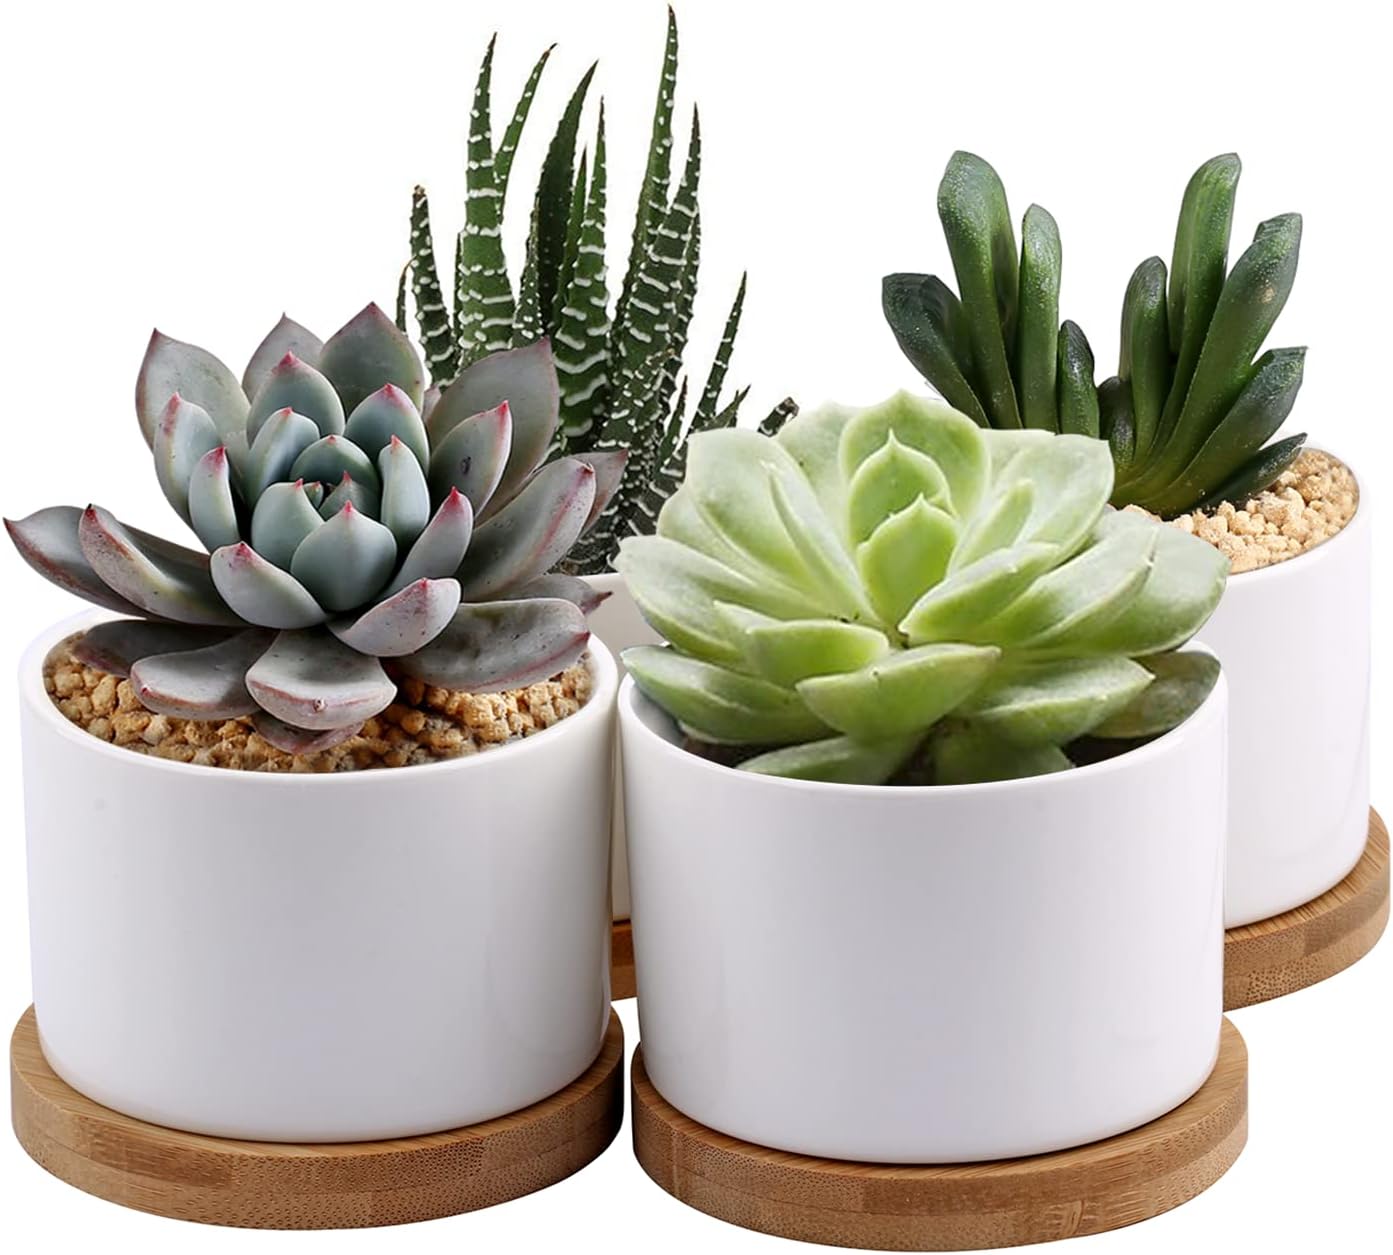 ZOUTOG Succulent Planter, White Mini 3.15 inch Ceramic Flower Planter Pot with Bamboo Tray, Pack of 4 - Plants Not Included